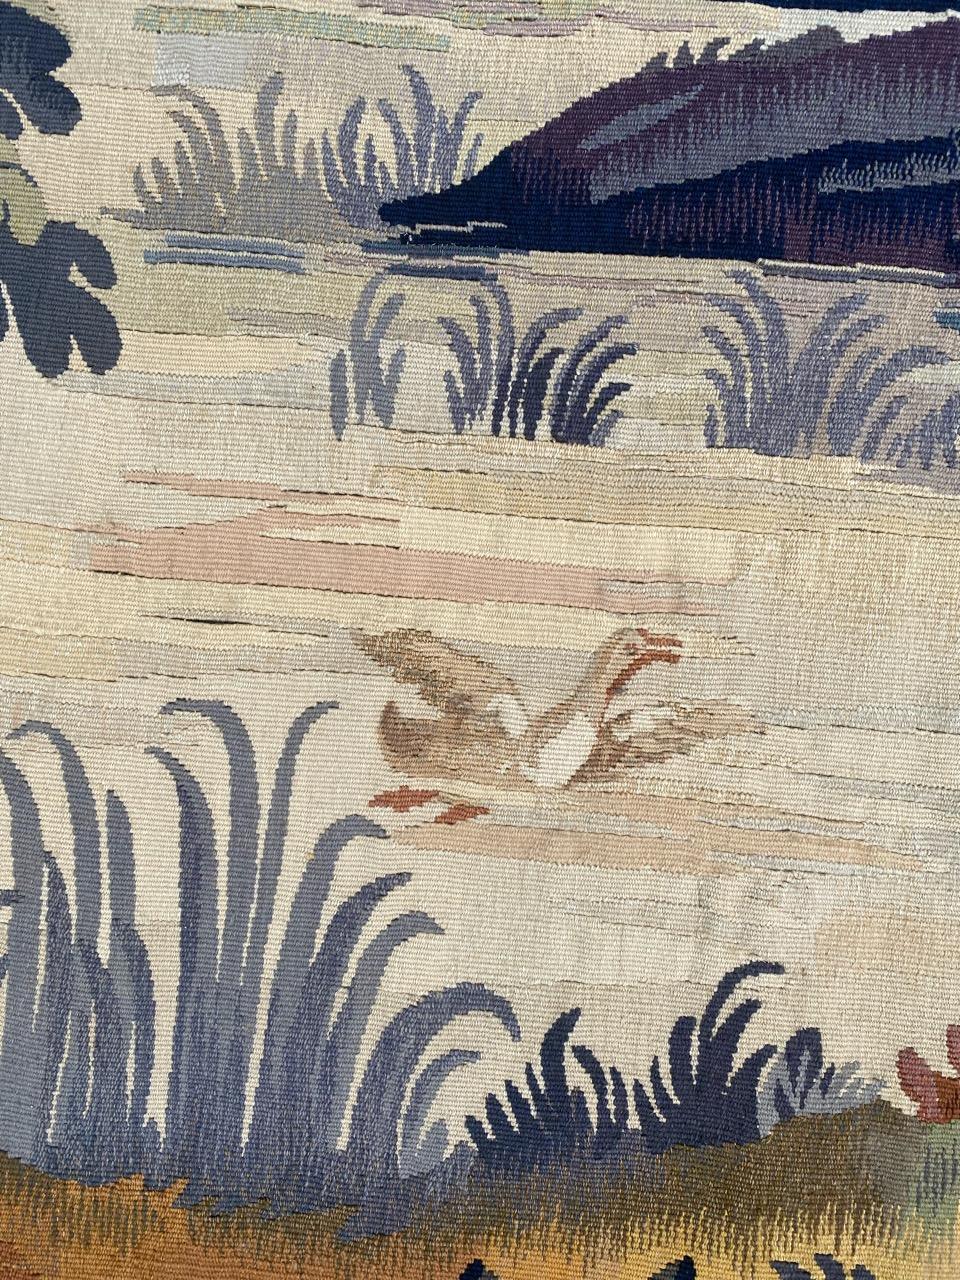 Nice early 20th century French Aubusson tapestry with beautiful design of country scene and beautiful colors, entirely hand woven with wool and silk.

✨✨✨
